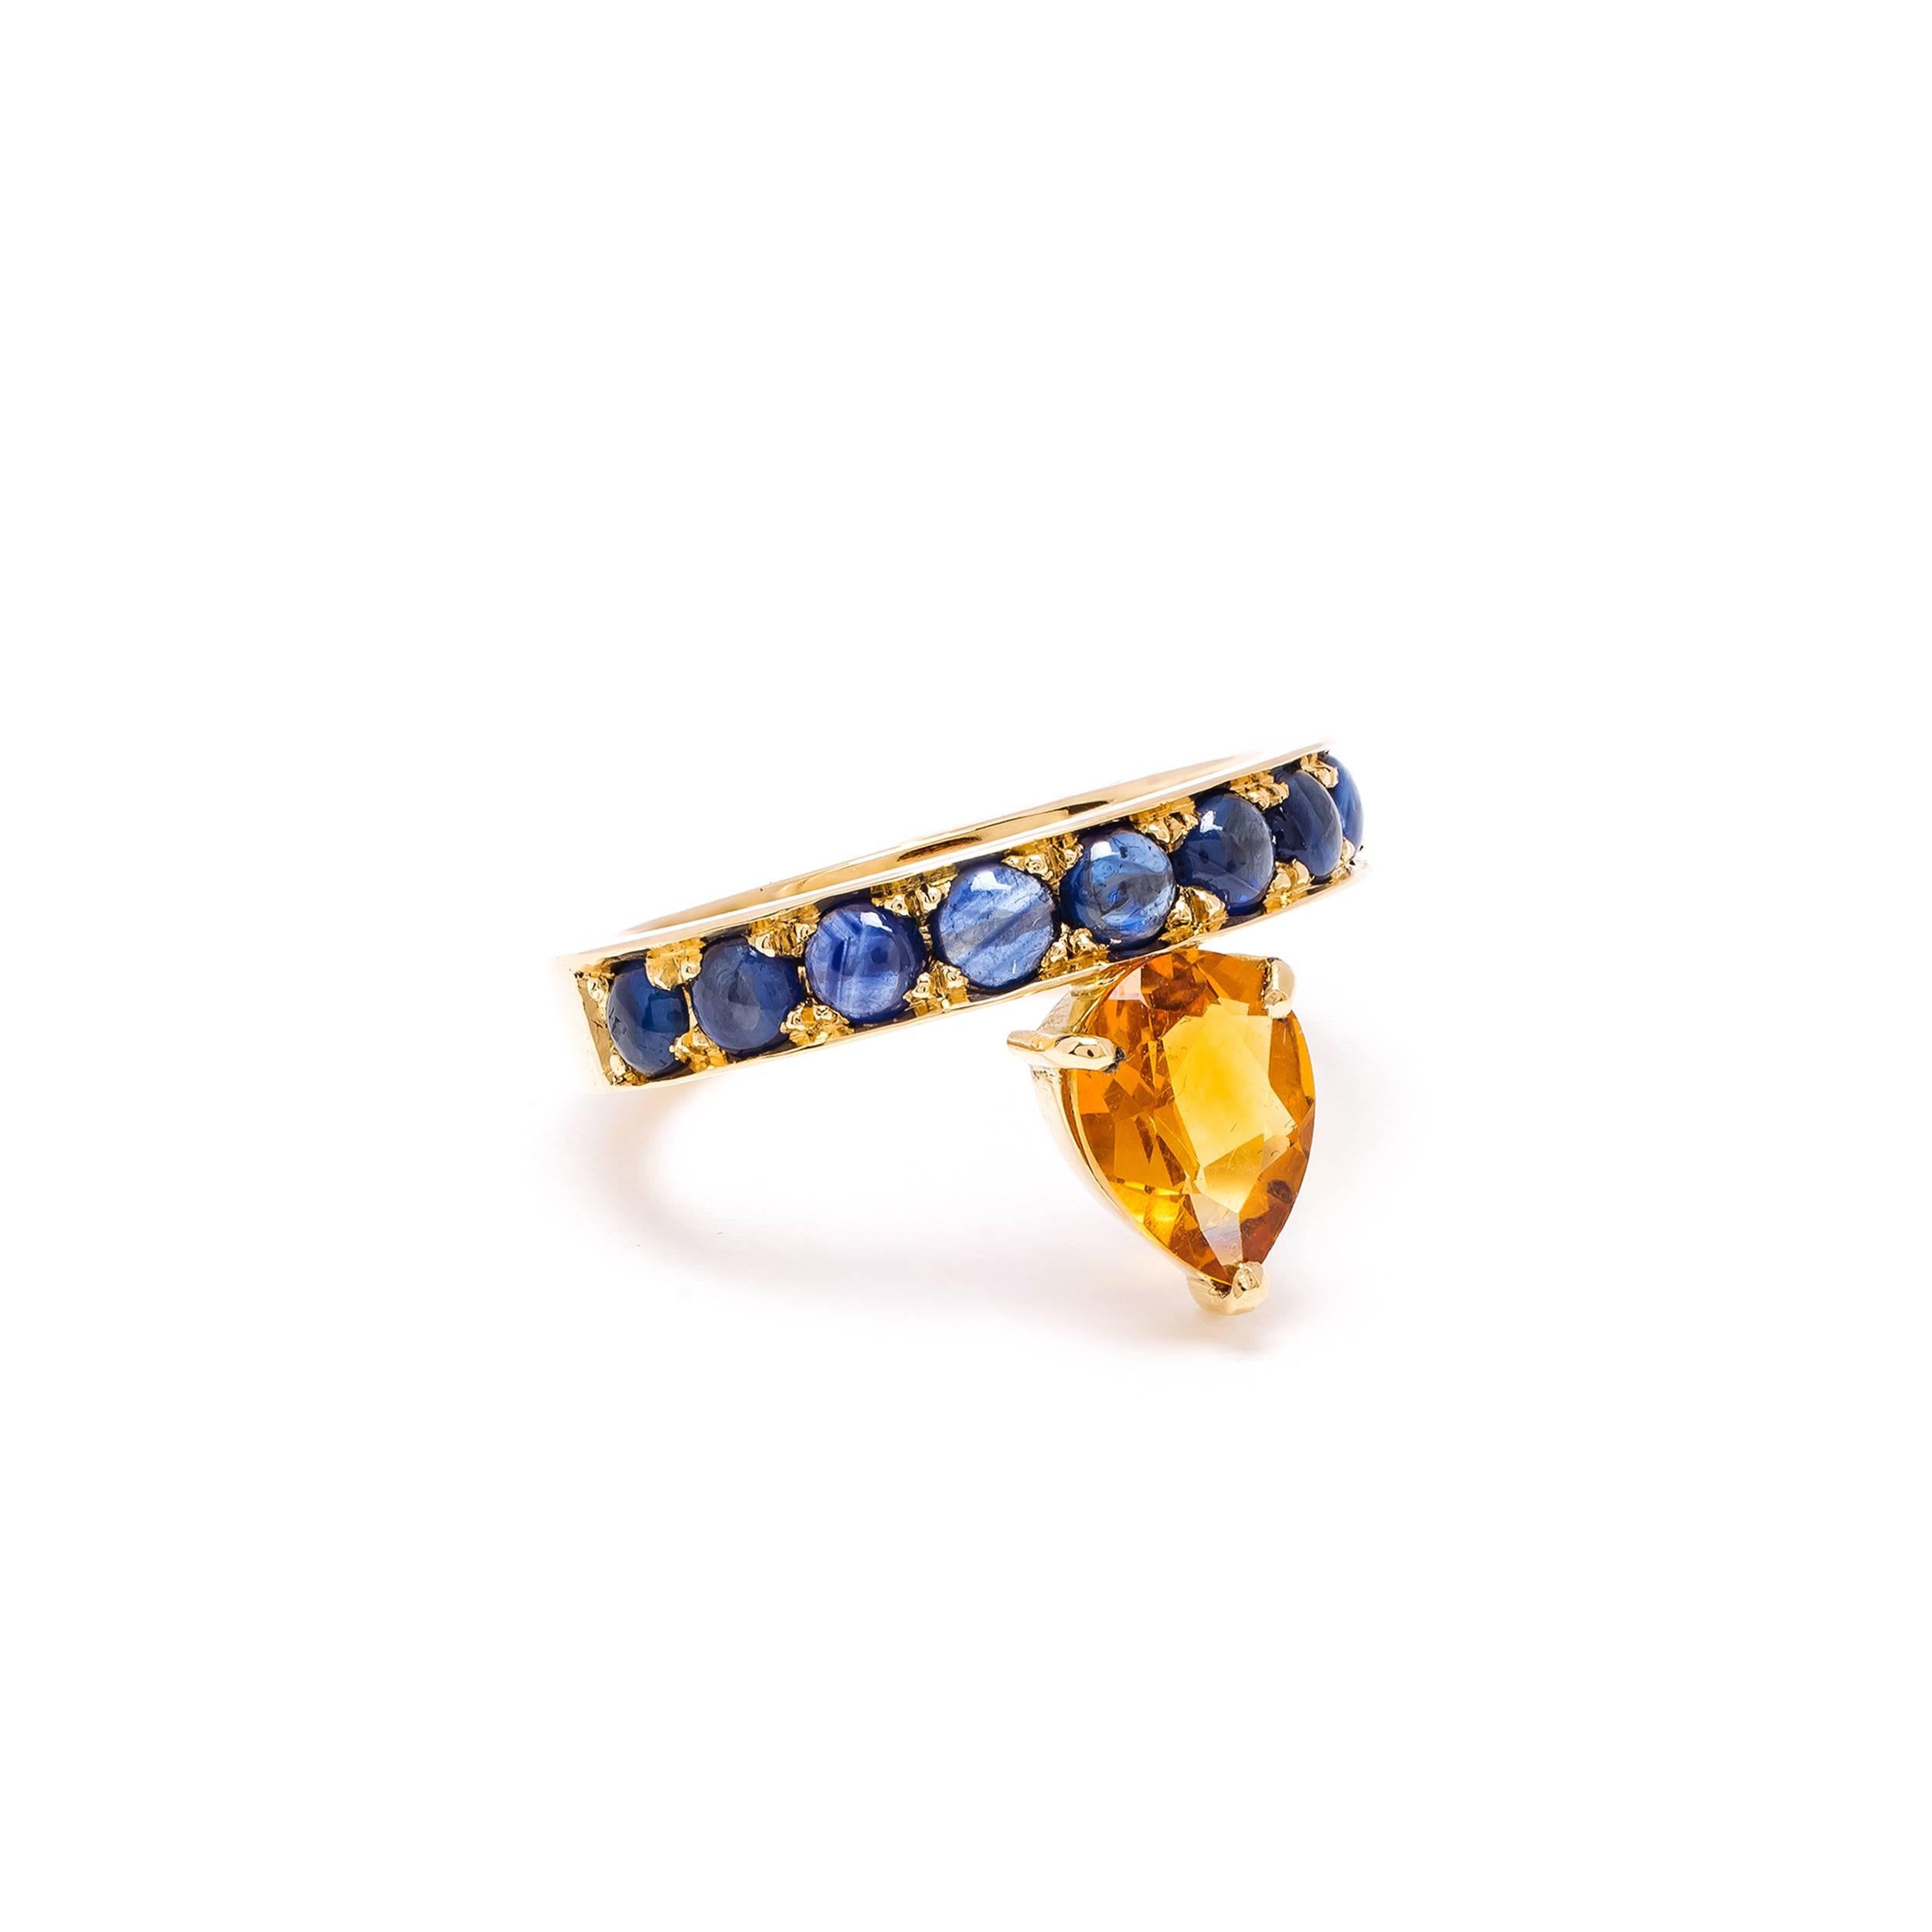 This DUBINI ring from the 'Theodora' collection features a citrine drop with sapphire cabochons set in 18K yellow gold. 

Ring size available: 51

The ring may be ordered in any size with a lead time of 2-3 weeks.

Please note that we offer a